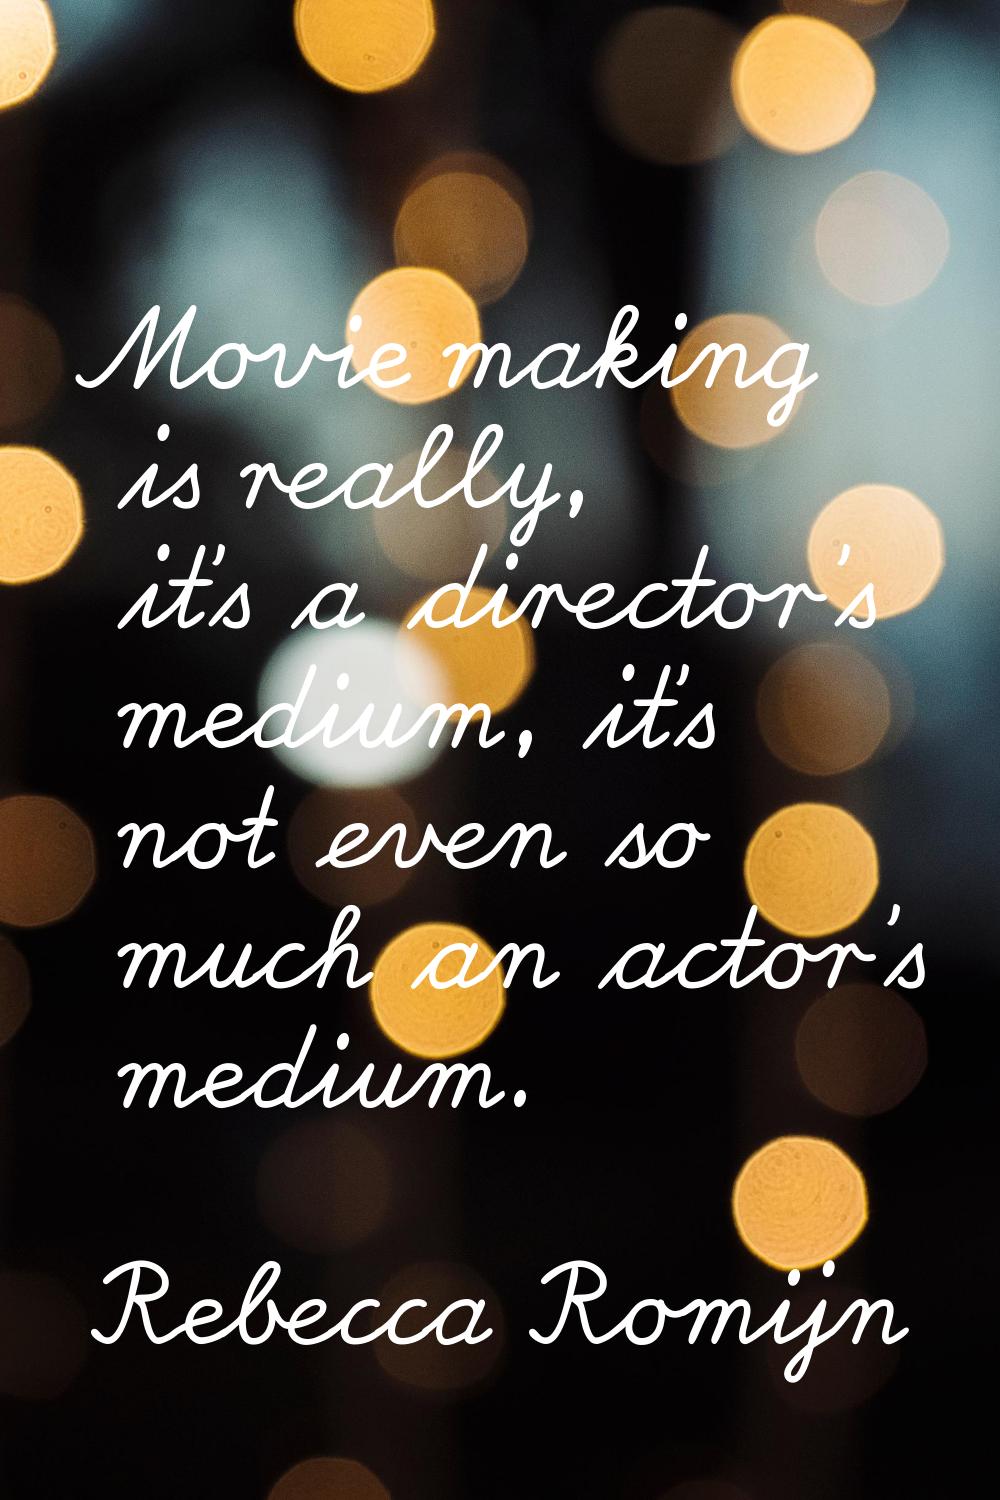 Movie making is really, it's a director's medium, it's not even so much an actor's medium.